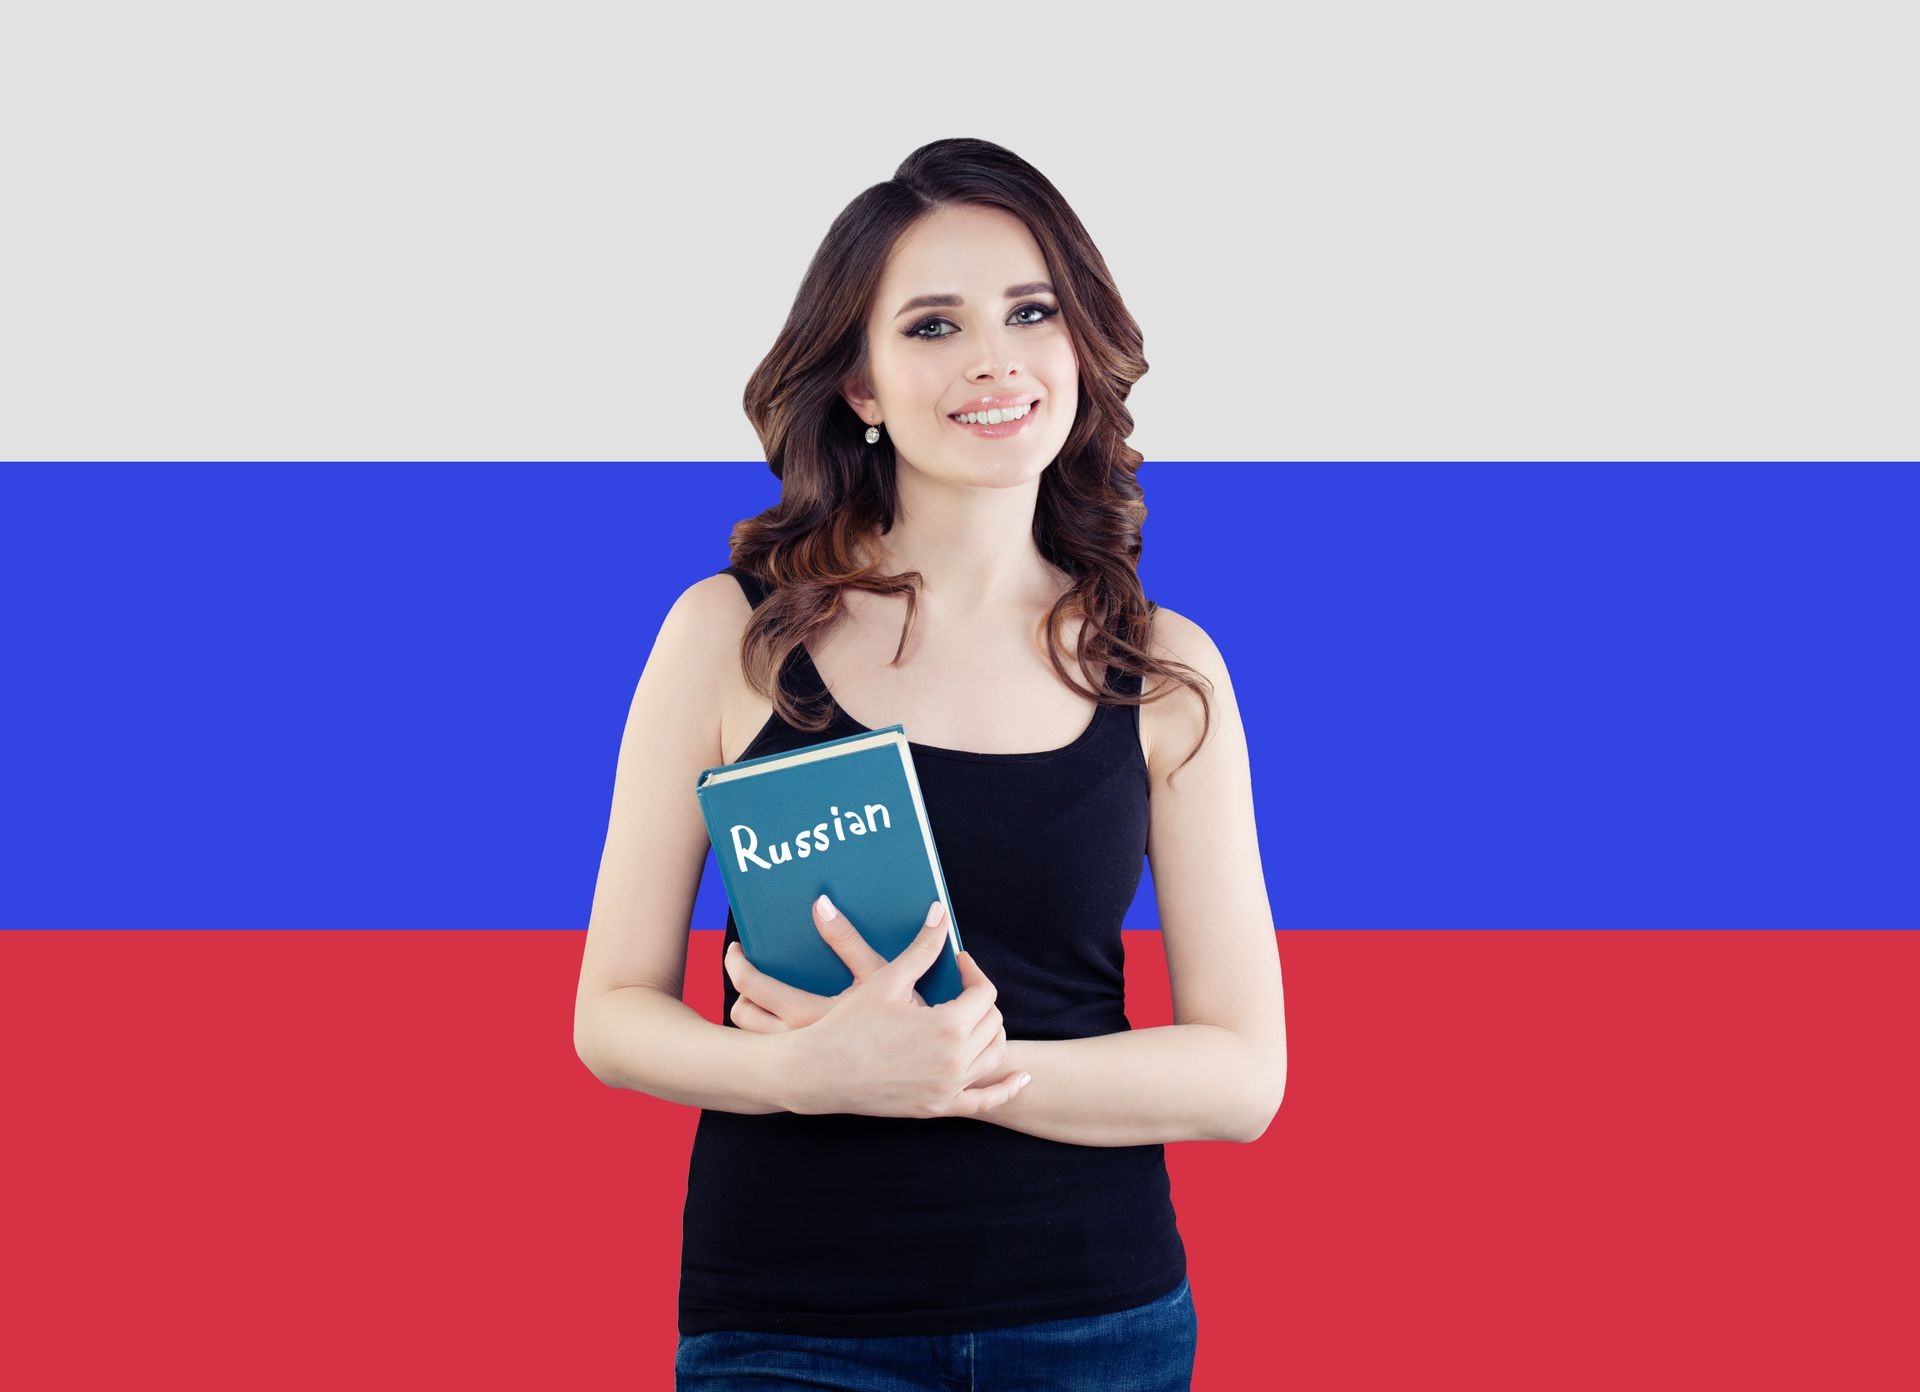 Beautiful happy woman student with textbook on the Russian Federation flag background. Learn russian language